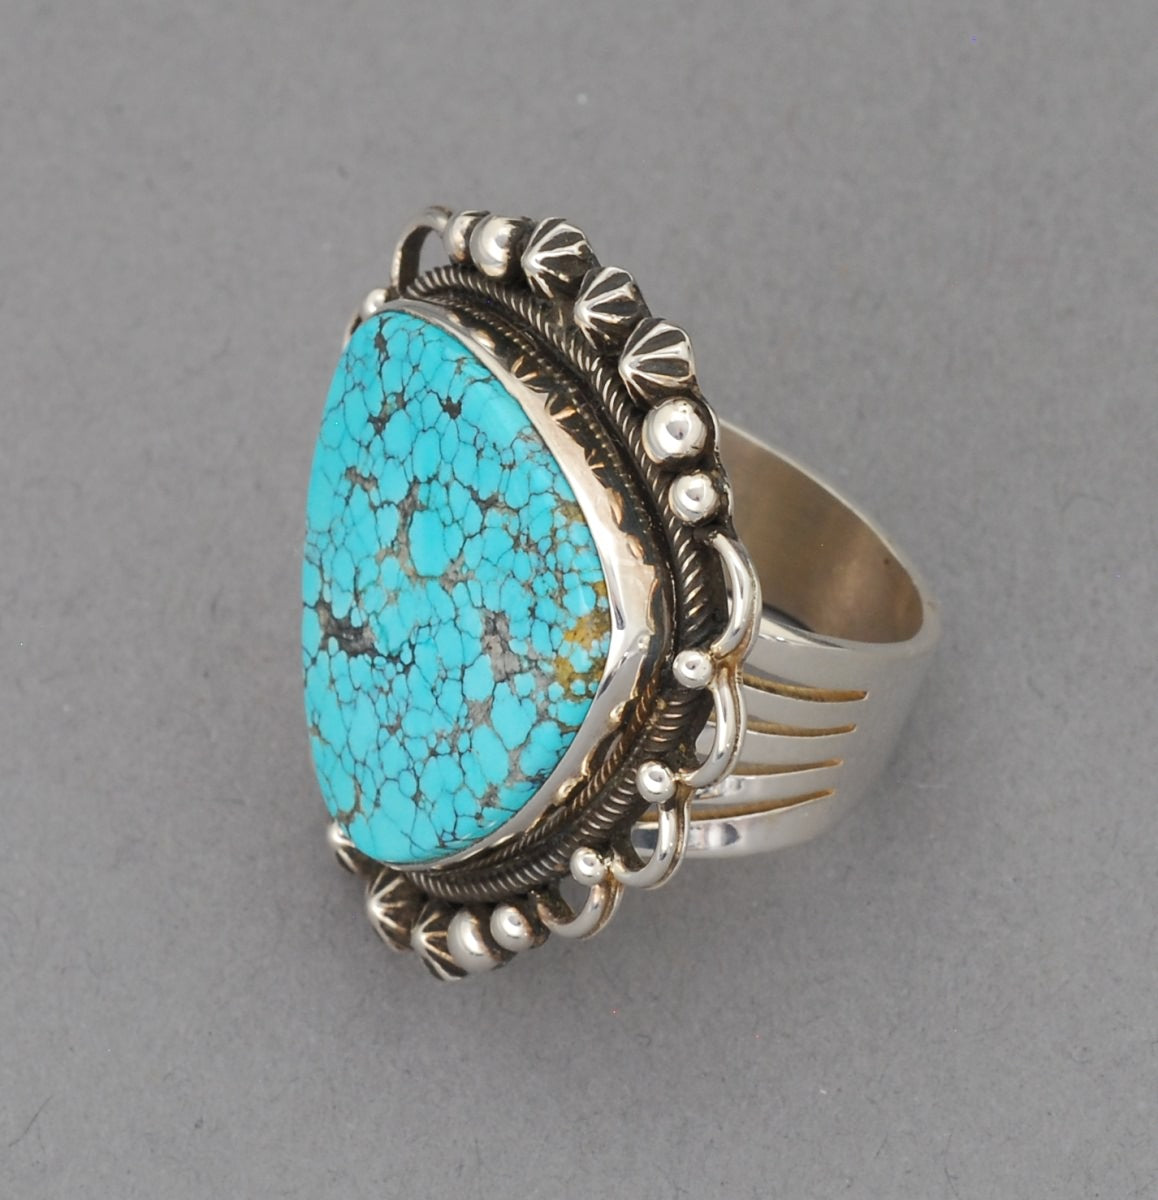 Classic Navajo Ring with large #8 Turquoise